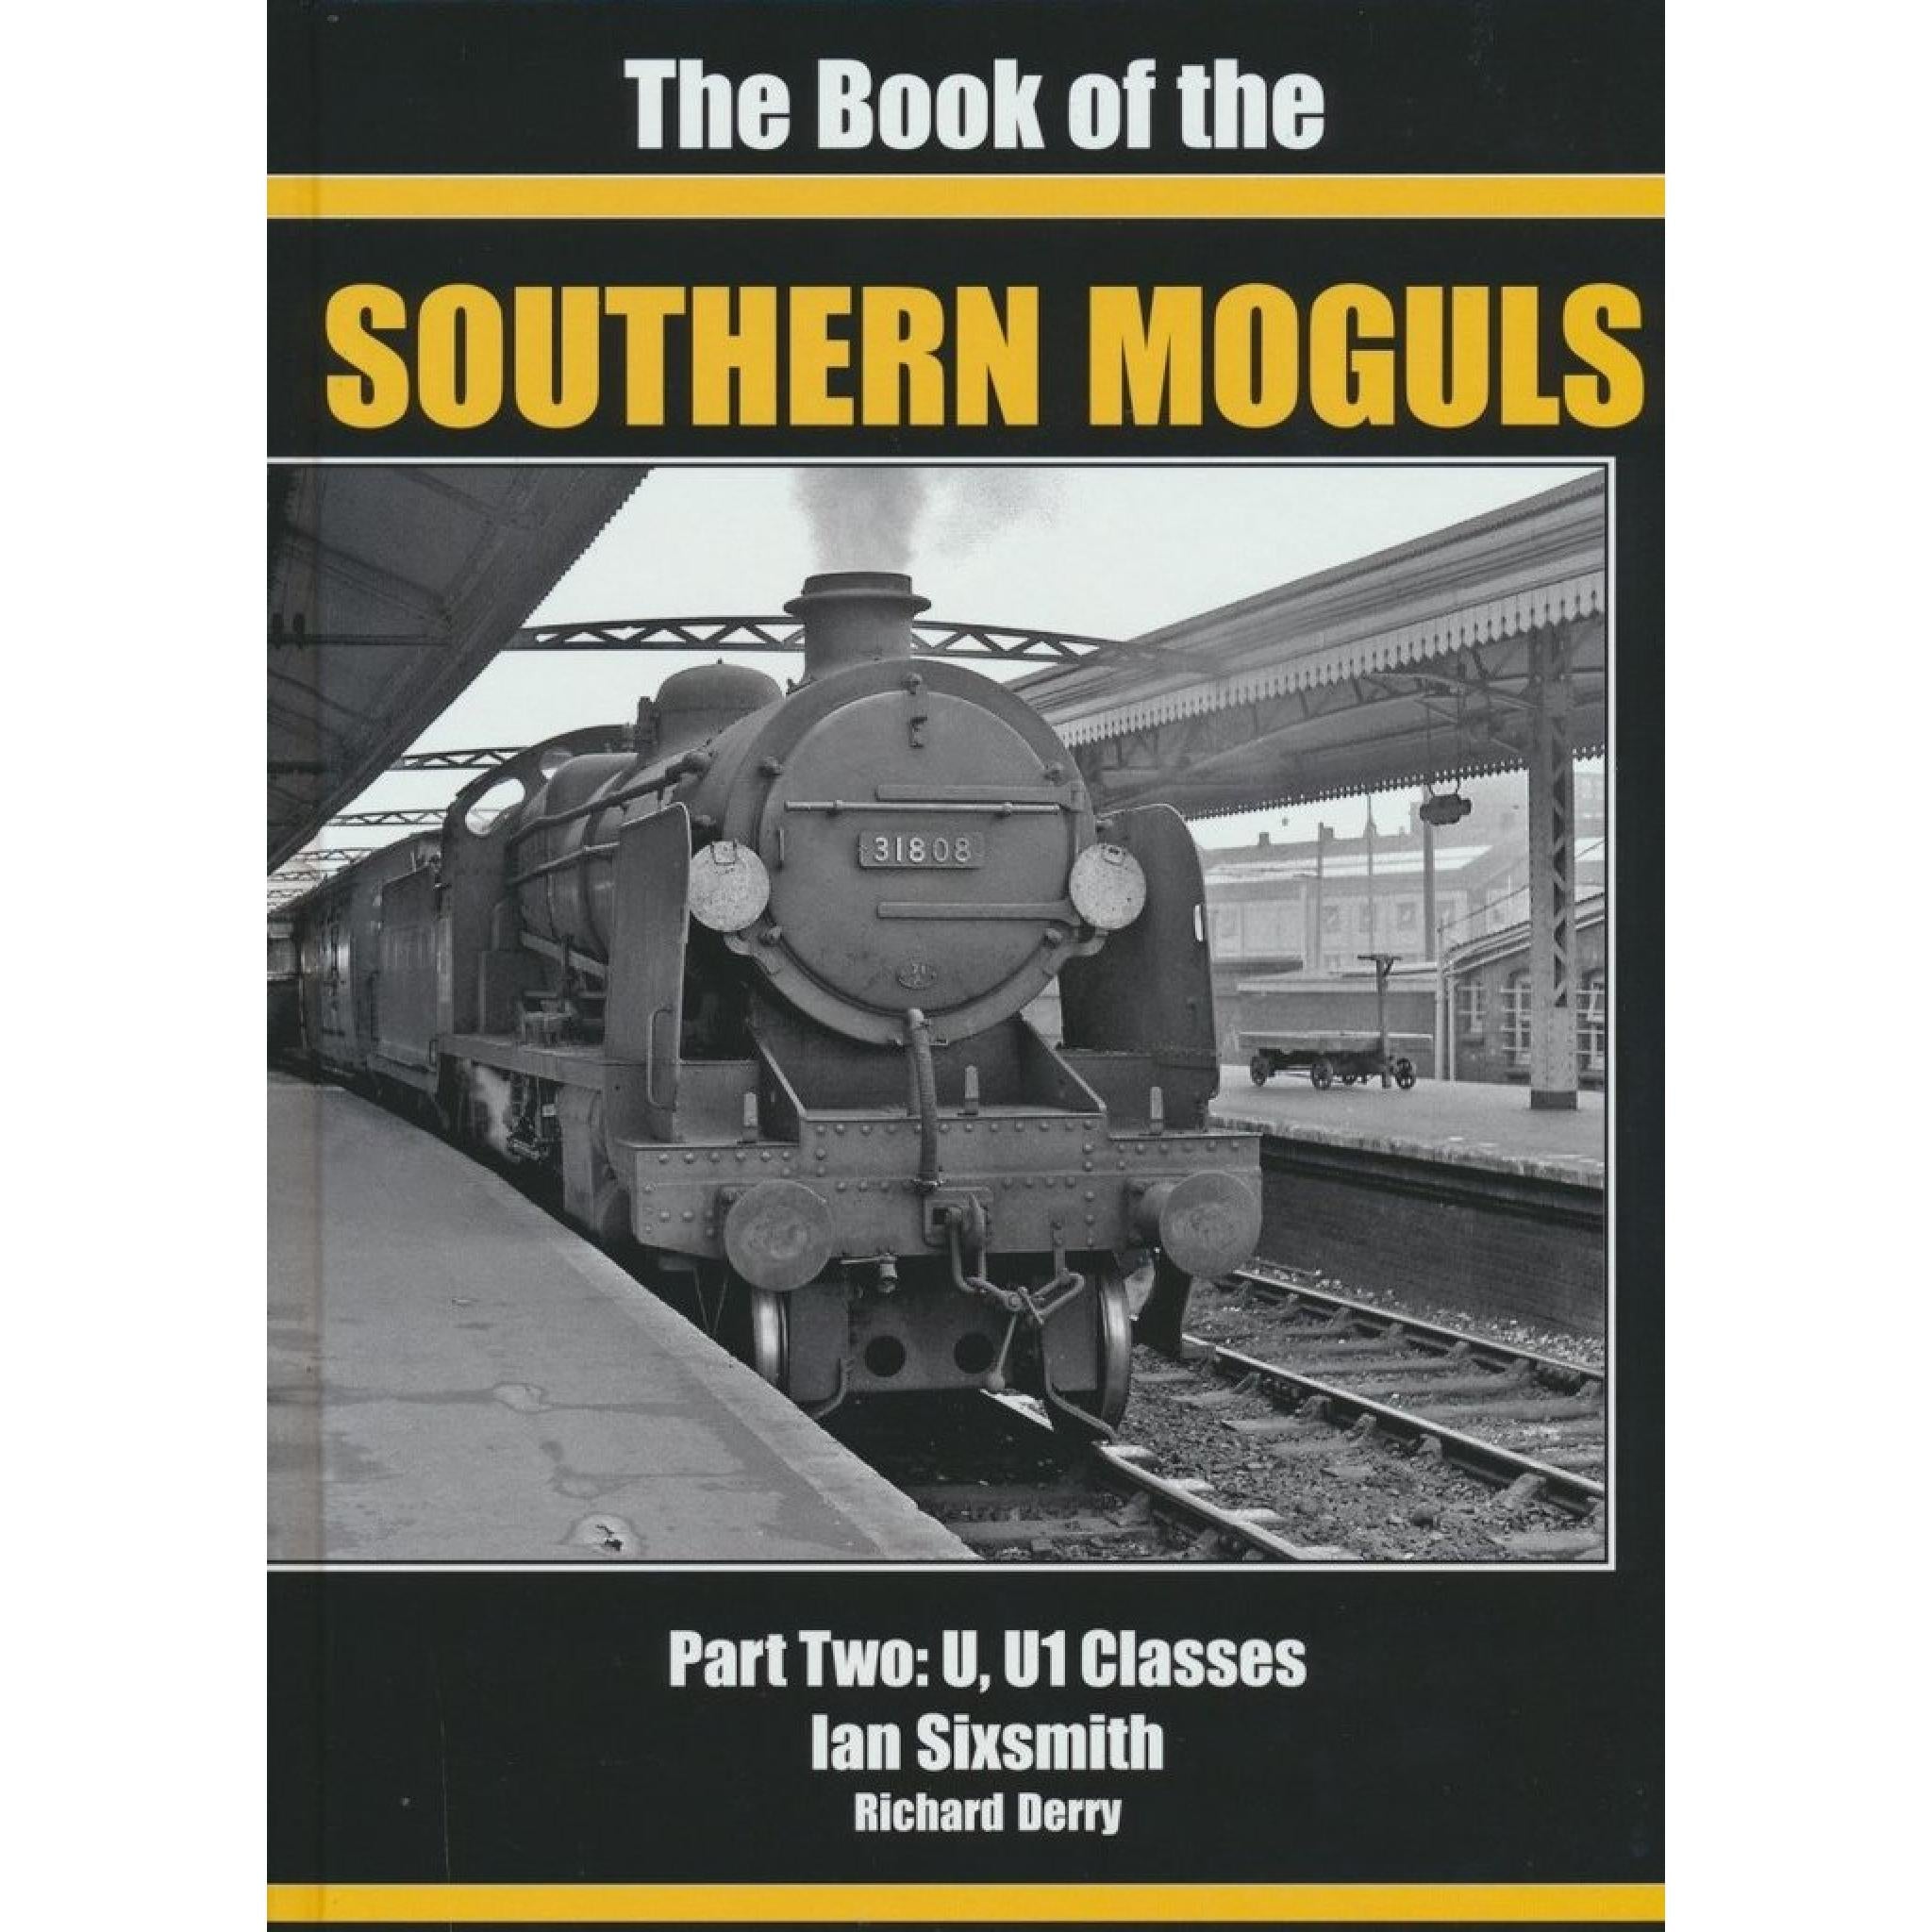 The Book of the Southern Moguls Part Two: U, U1 Classes